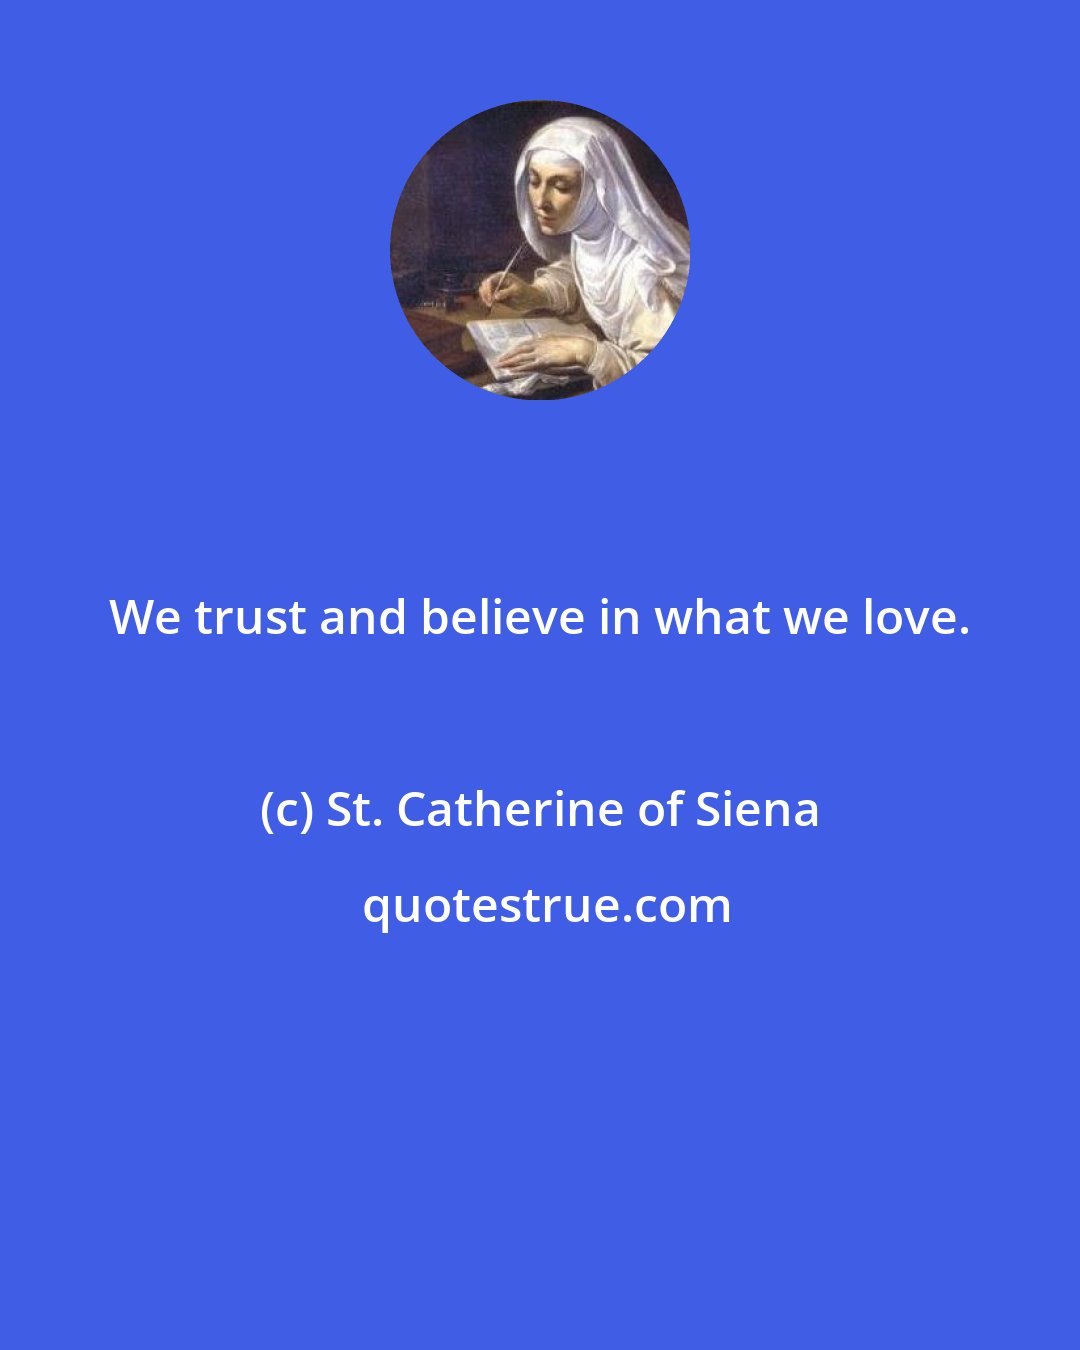 St. Catherine of Siena: We trust and believe in what we love.